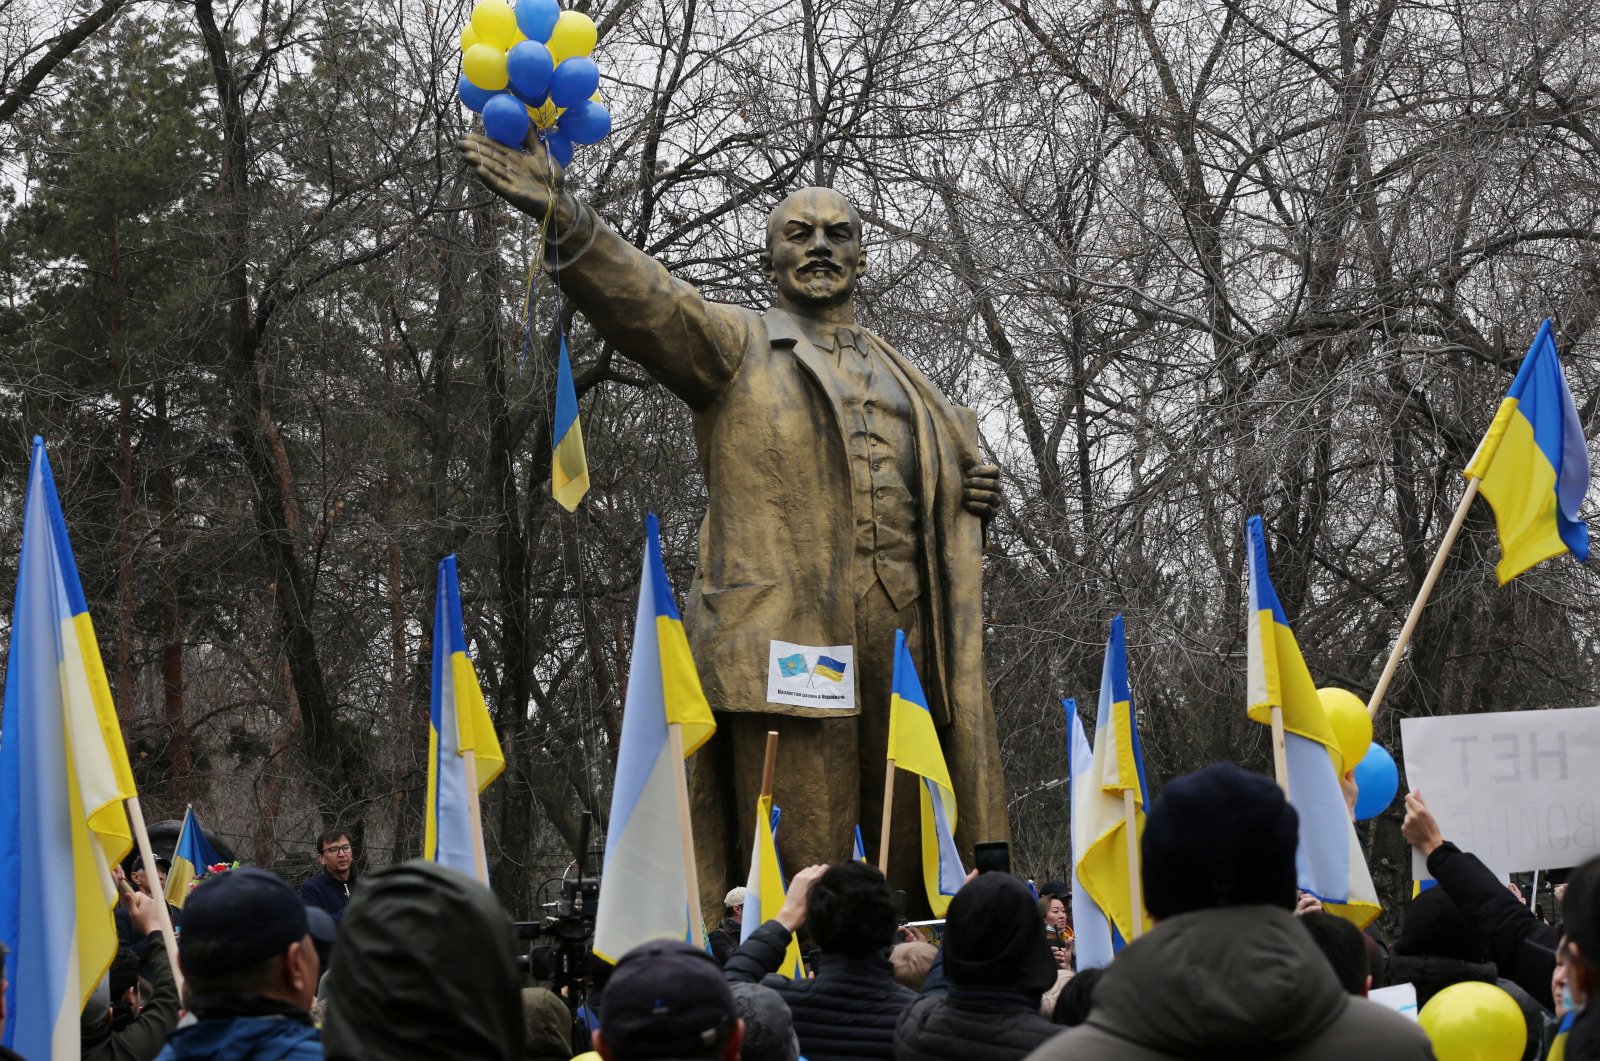 Demonstrators take part in an anti-war protest in support of Ukraine amid the Ukraine-Russia conflict, in front of the monument of Soviet state founder Vladimir Lenin in Almaty, Kazakhstan, March 6, 2022. (Reuters Photo)